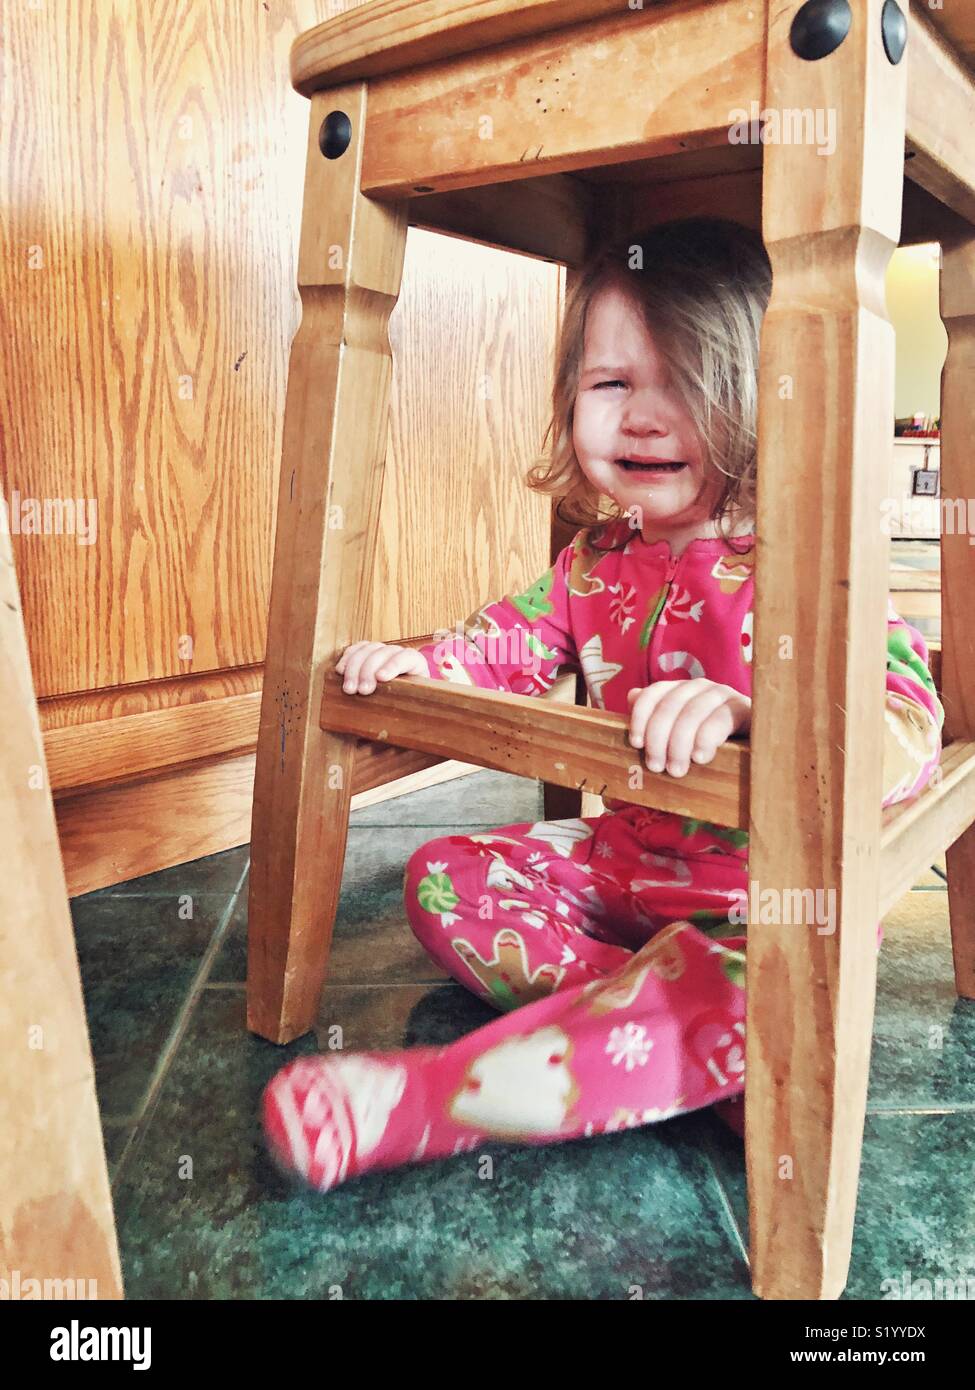 Toddler girl in Christmas onesie pyjamas crying on tile floor under a rustic wooden stool Stock Photo